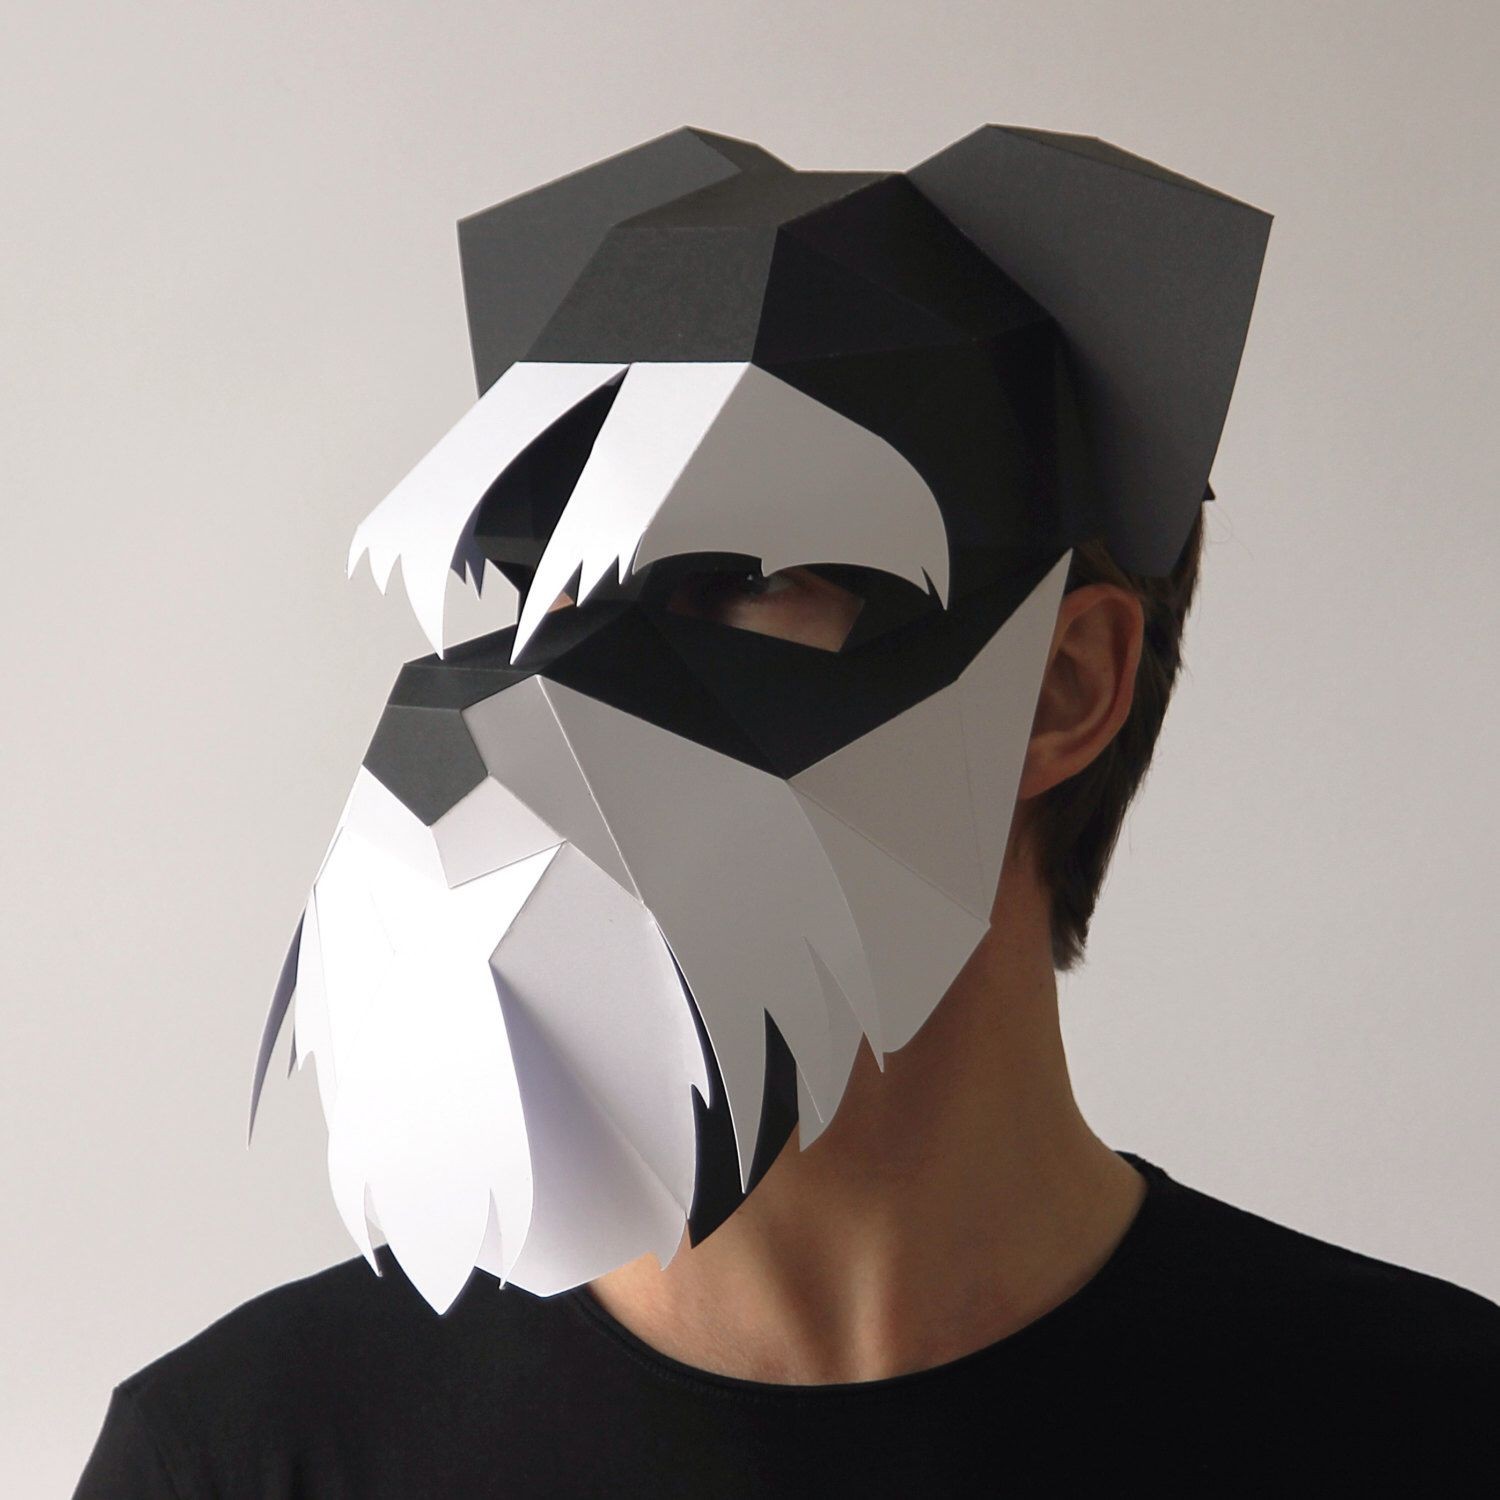 Papercraft Mask Dog Mask Build Your Own Schnauzer 3d Dog Mask From Card Using